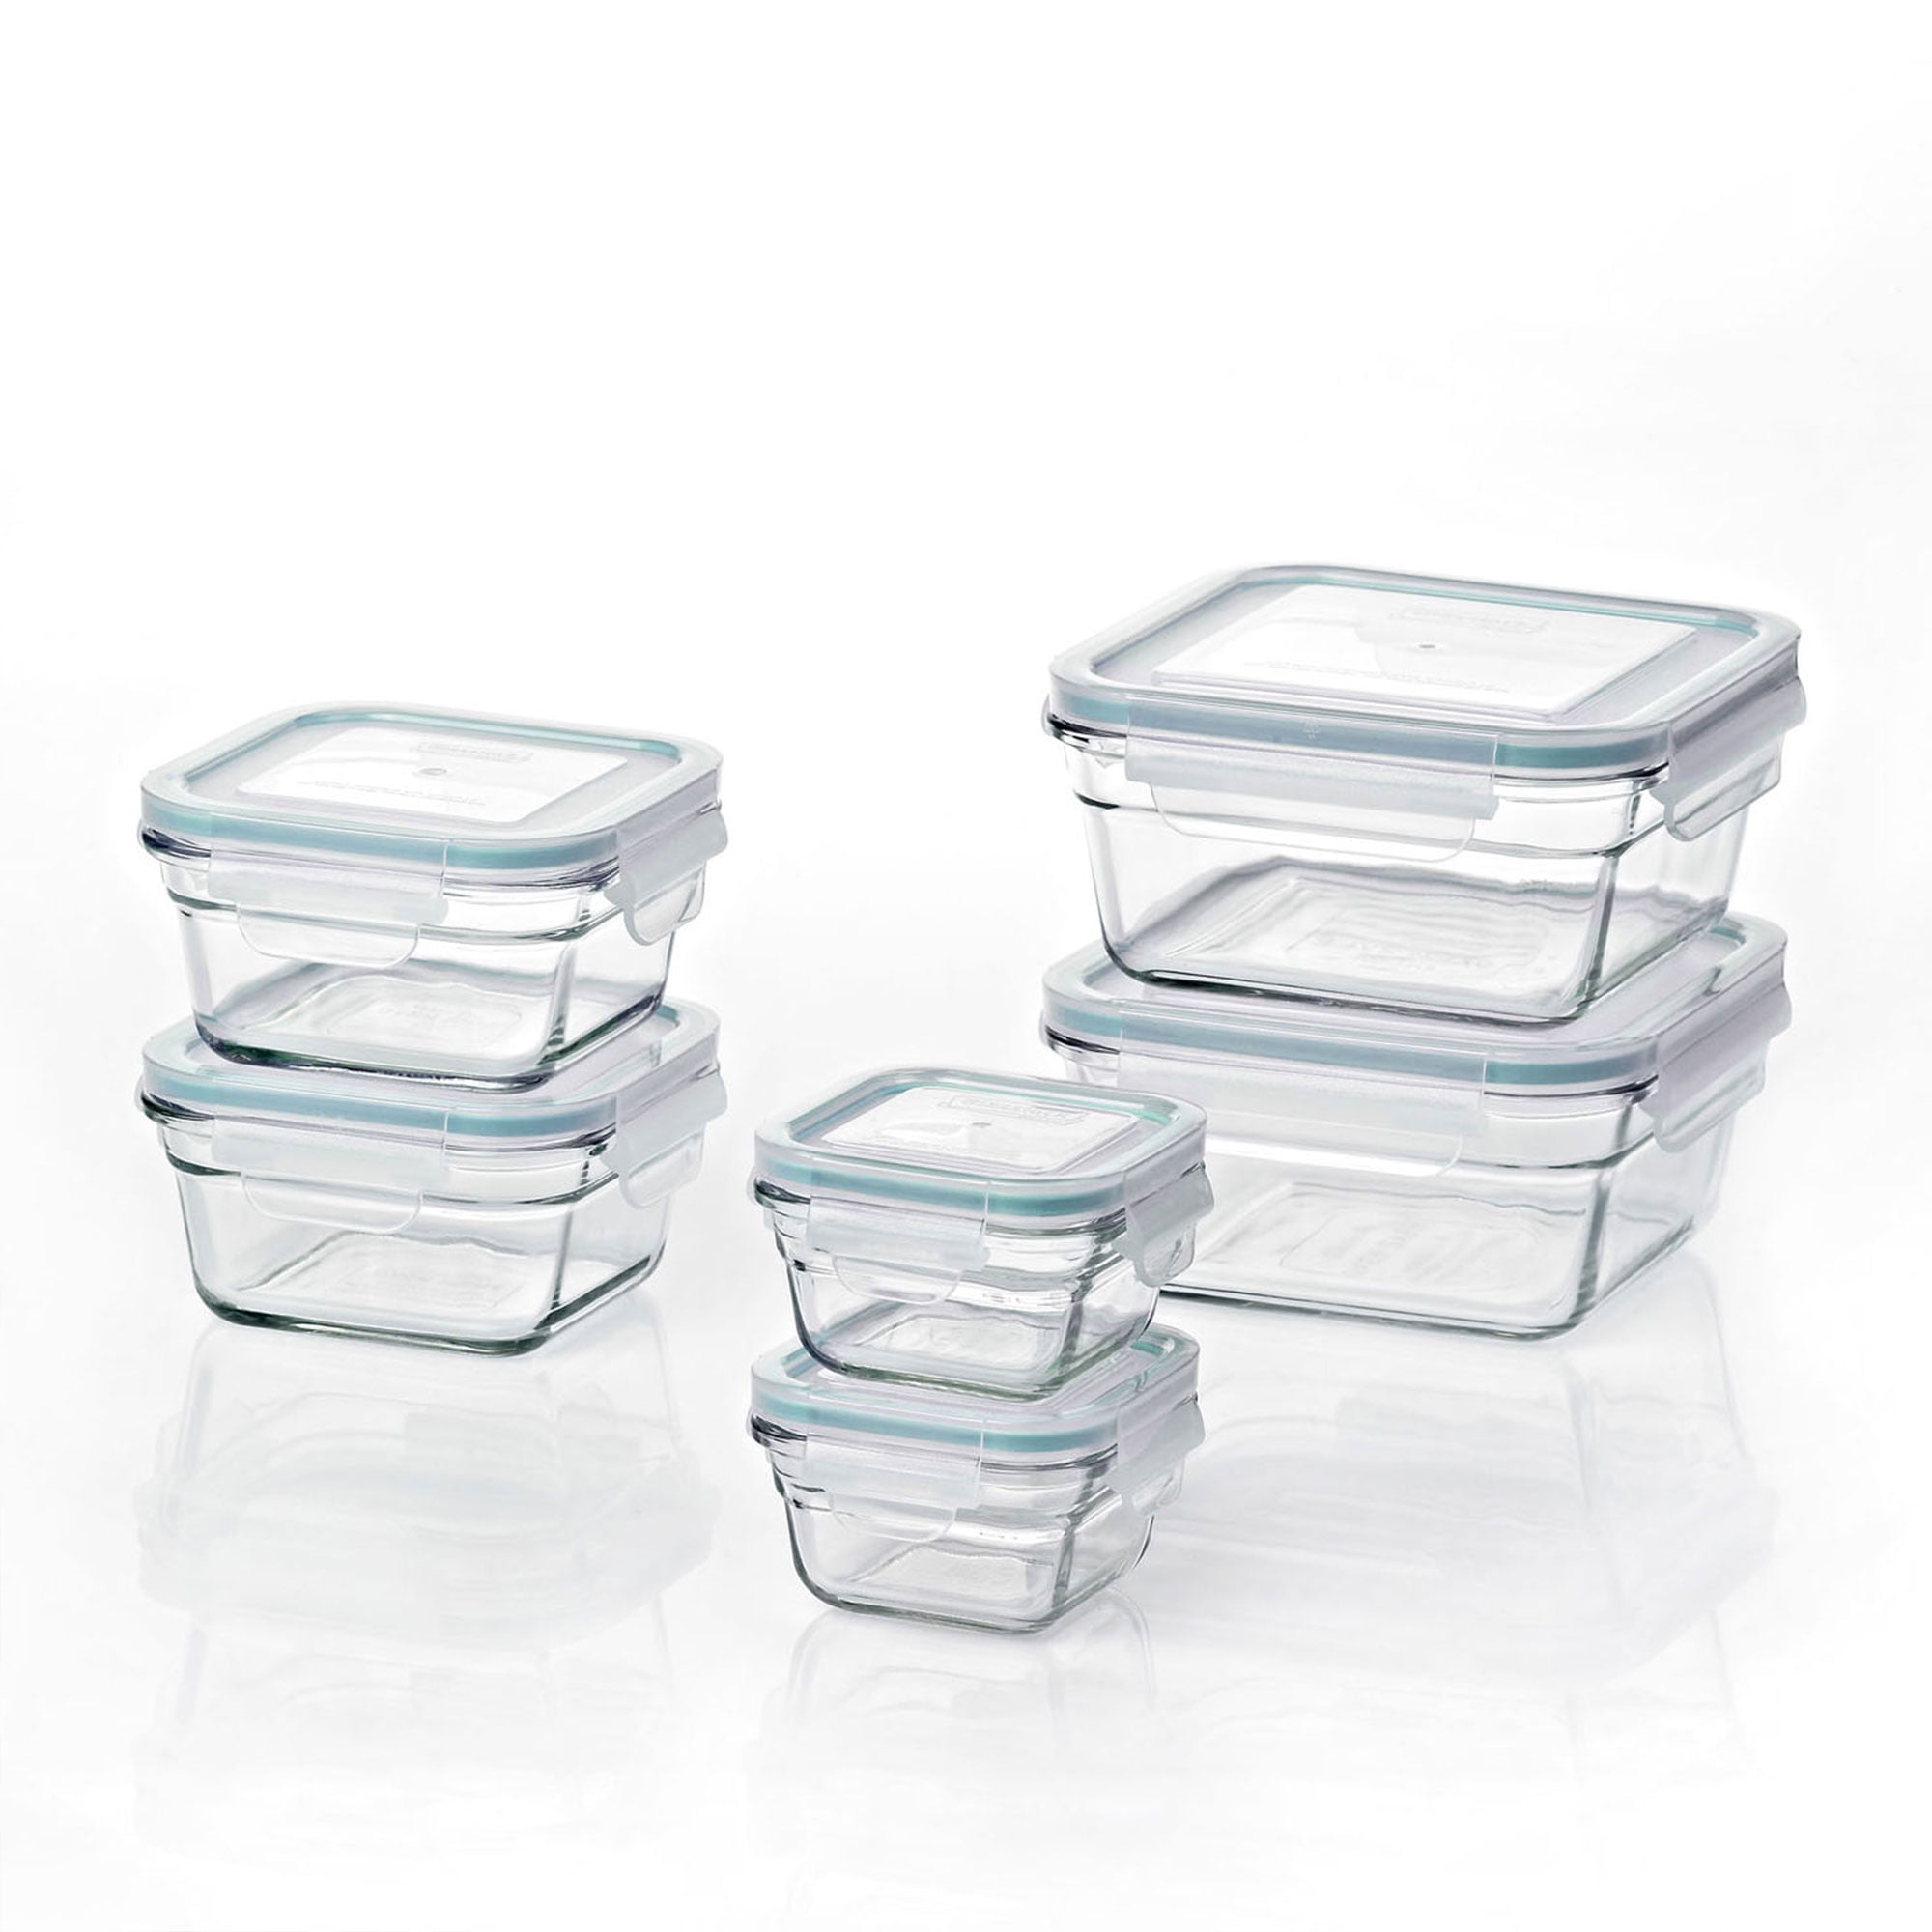 Glasslock Glass Food Storage Containers with Locking Lids, 16 Piece Set